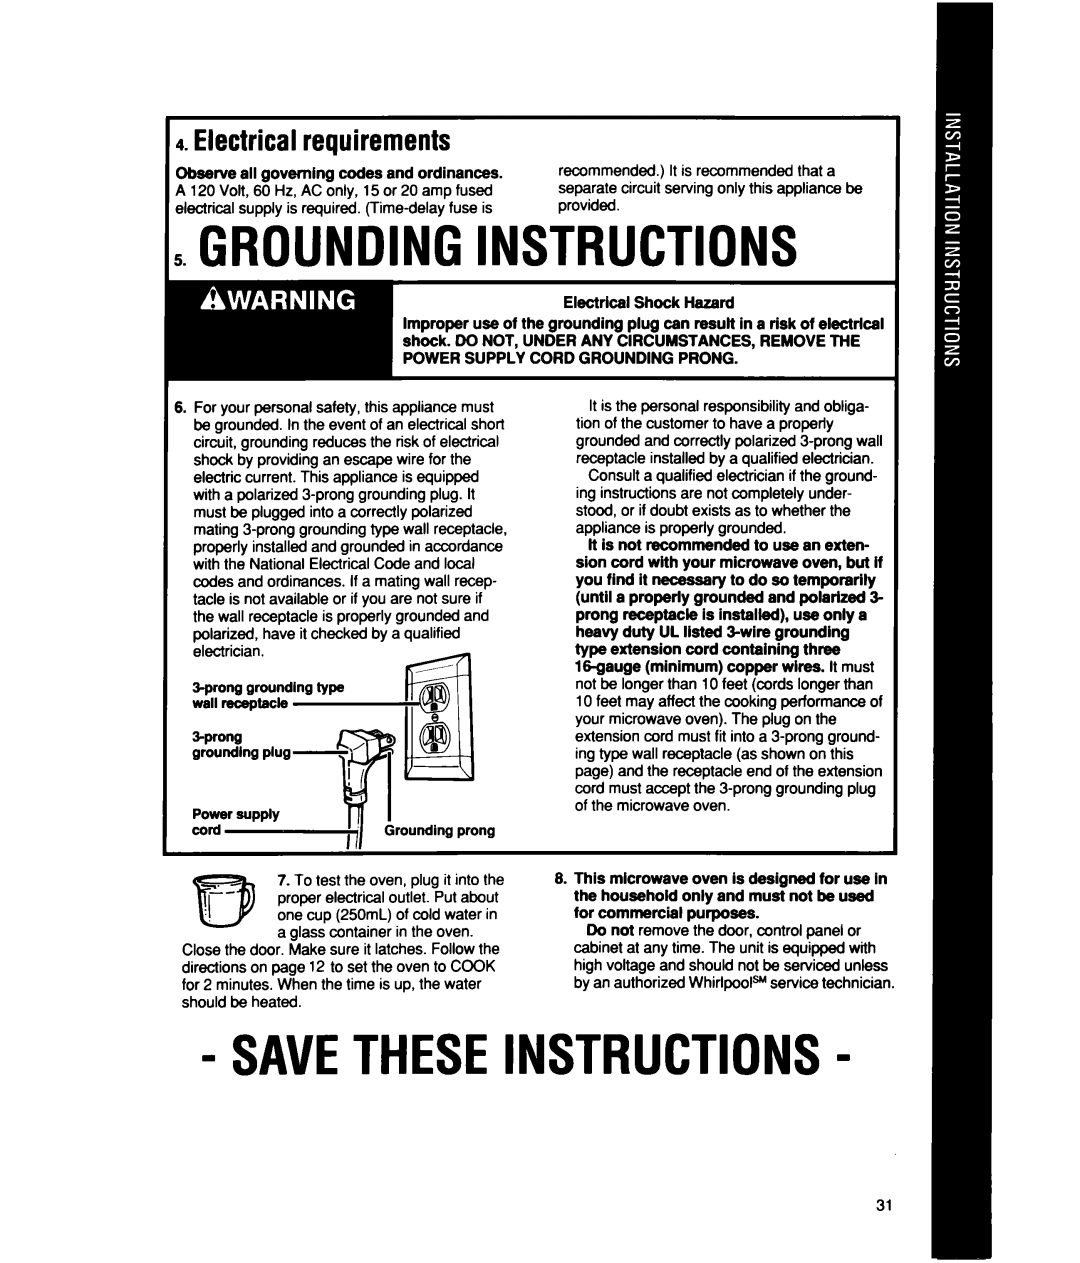 Whirlpool MS2101XW, MS2100XW manual Groundinginstructions, Savetheseinstructions, Electrical requirements 